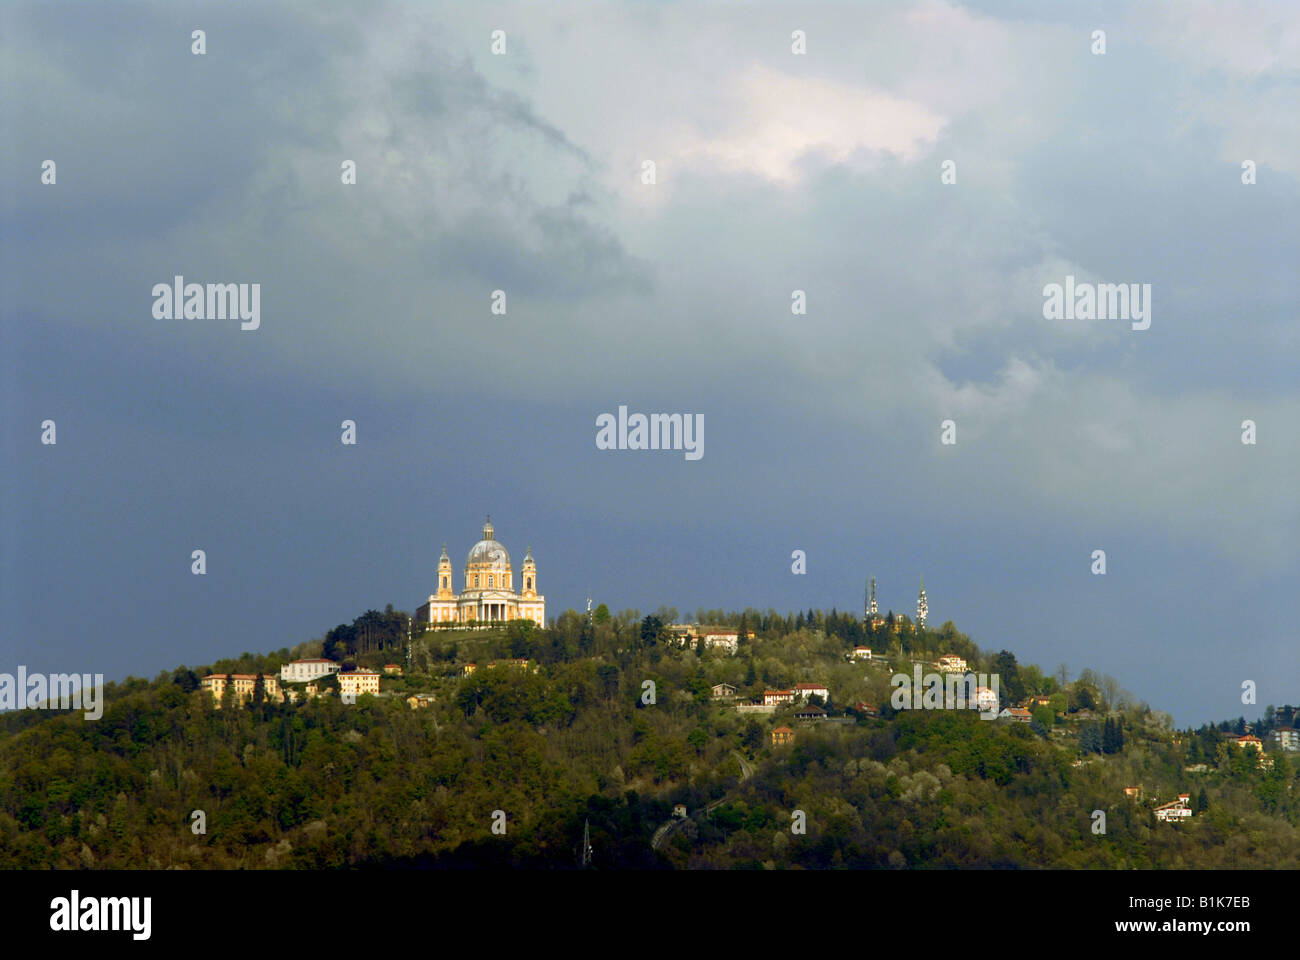 The Basilica di Superga, built by architect Filippo Juvarra, overlooking the city of Turin, Piedmont, Italy. Stock Photo